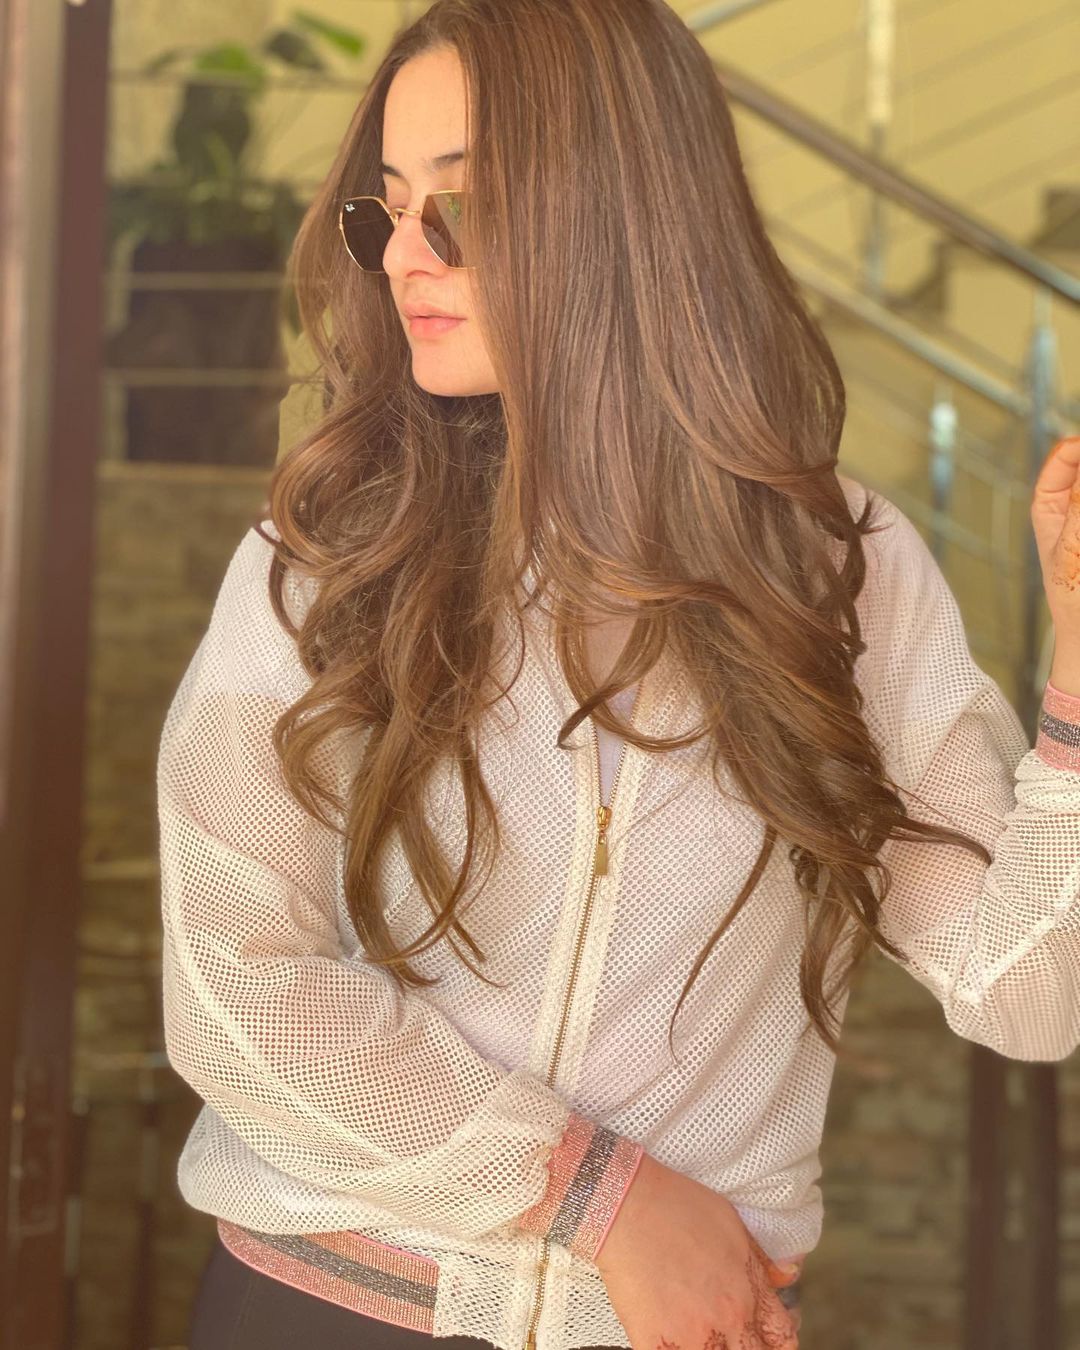 Aiman Khan is Looking Extremely Gorgeous in her Latest Pictures